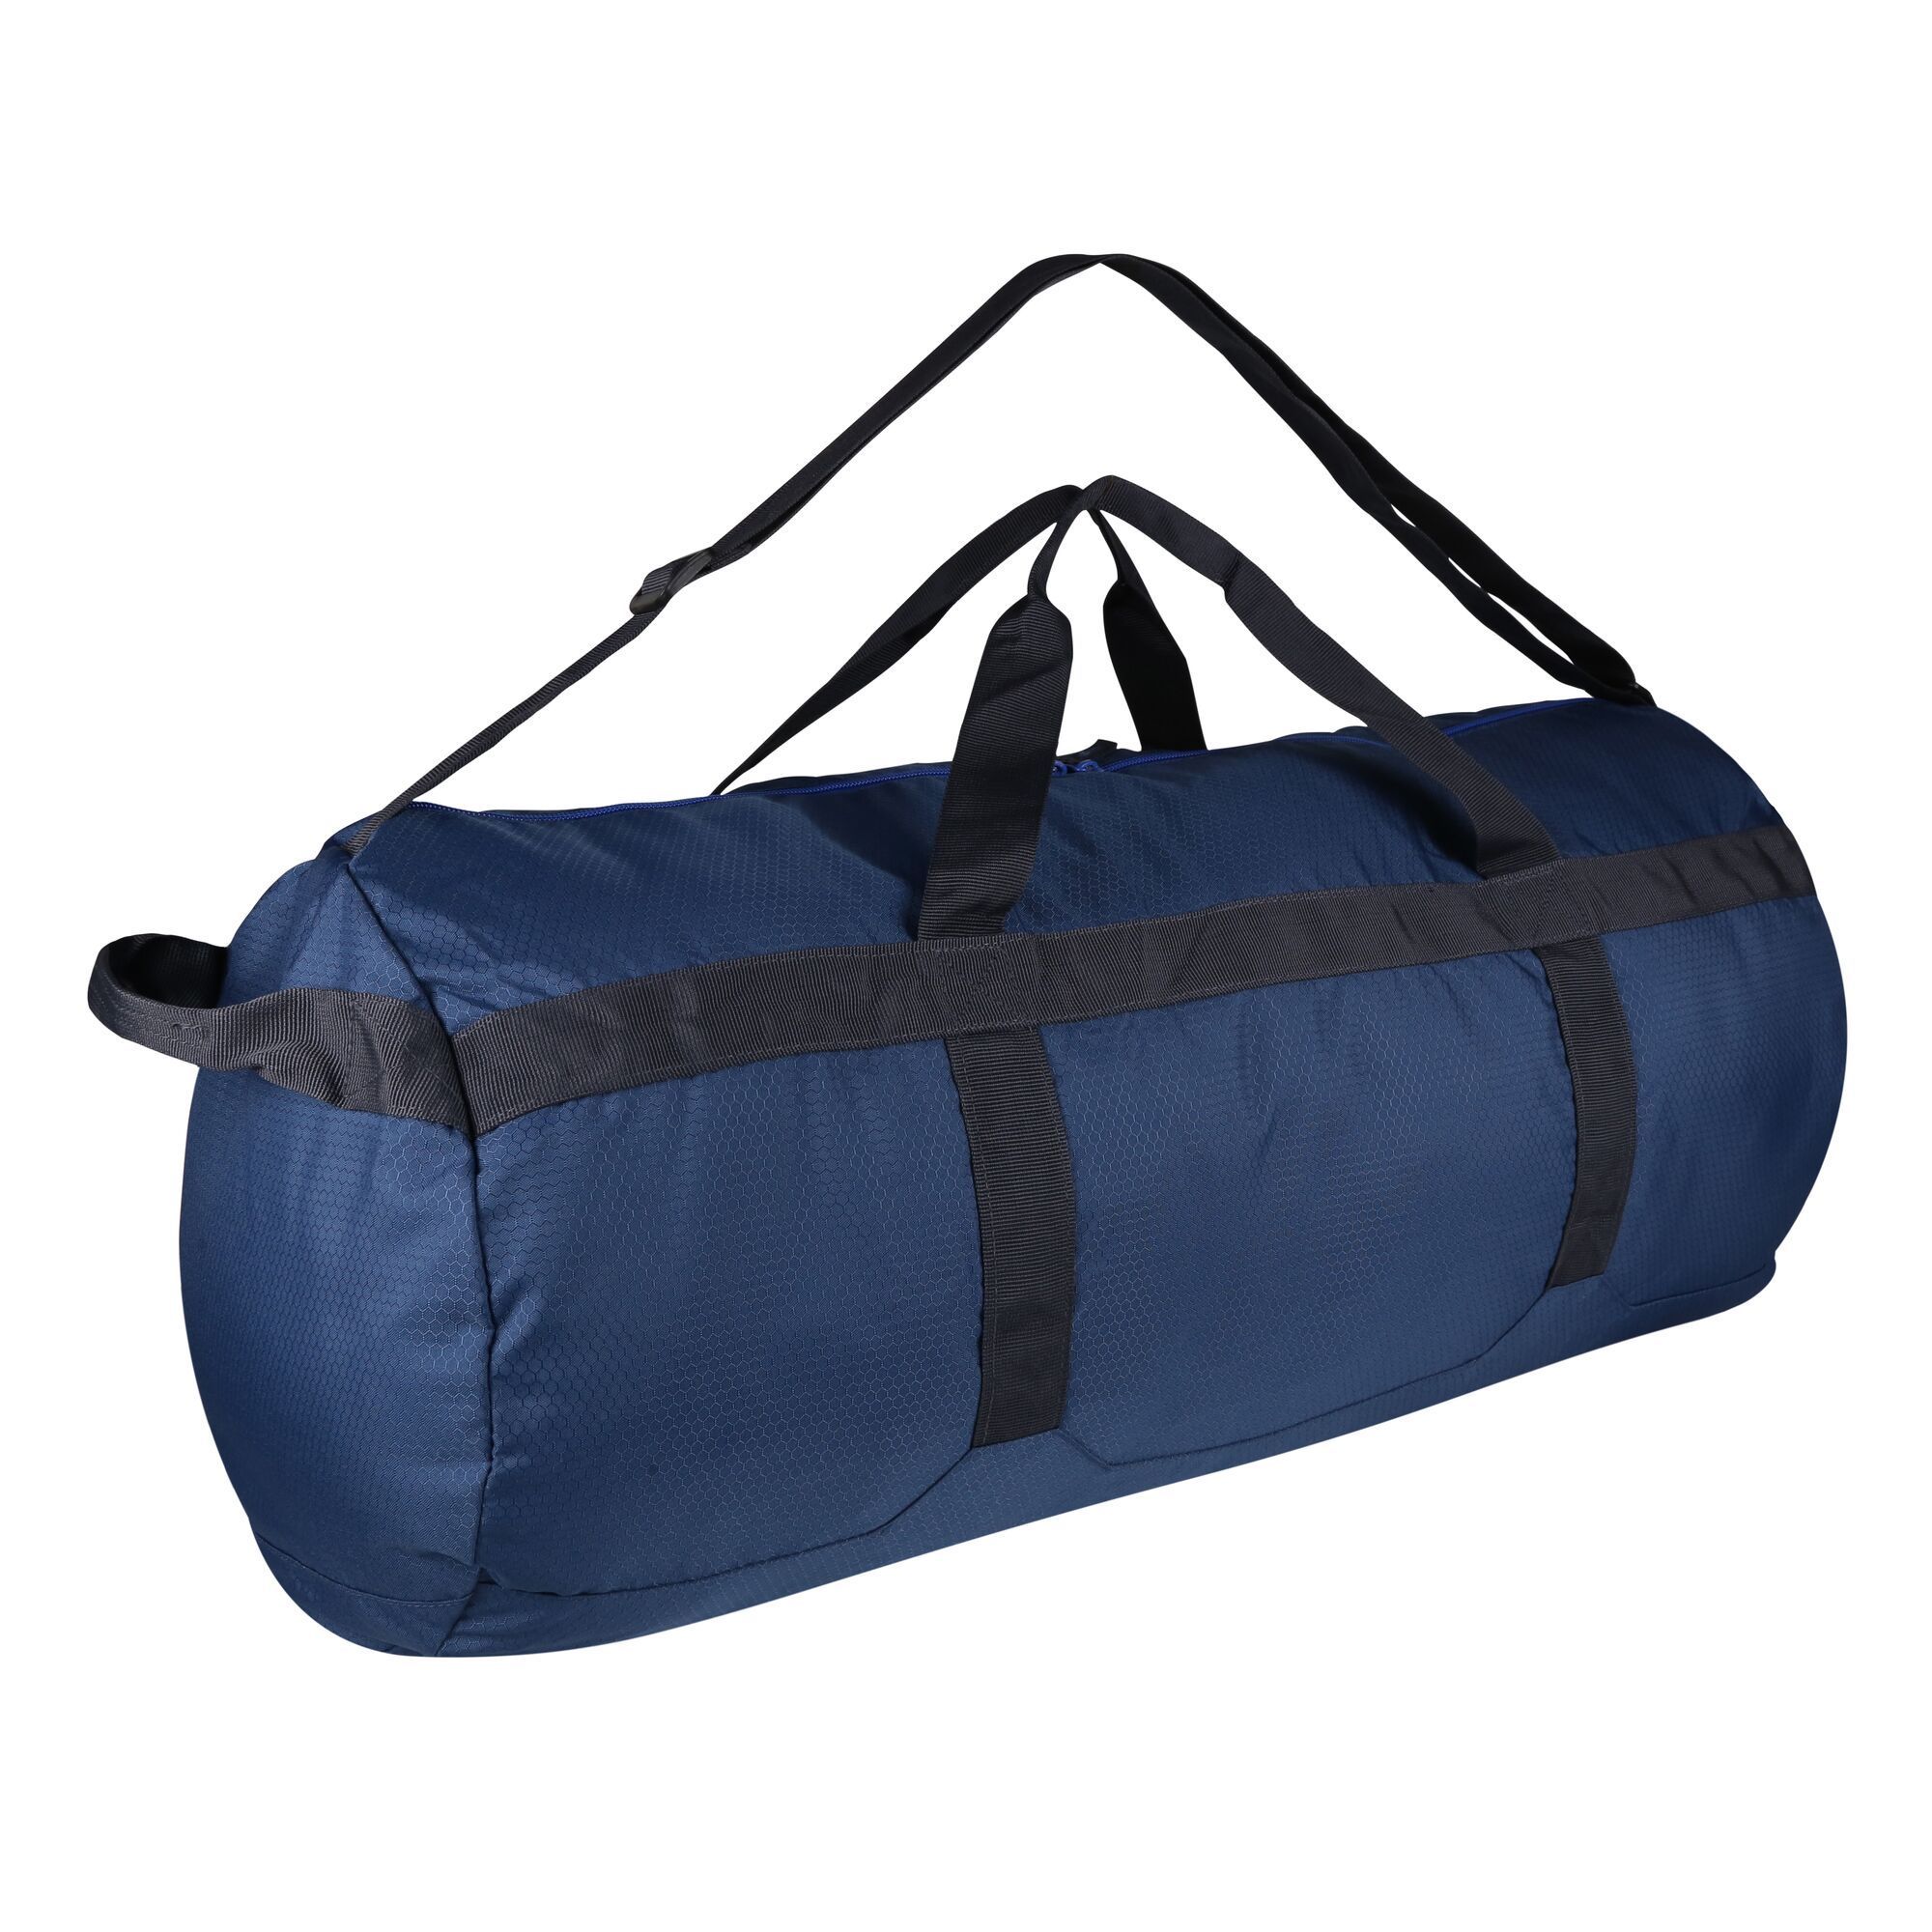 60L capacity duffel bag. Packaway - packs into its own front pocket. Large main compartment. Adjustable shoulder strap. Grab handles. Made from a lightweight polyester honeycomb fabric.